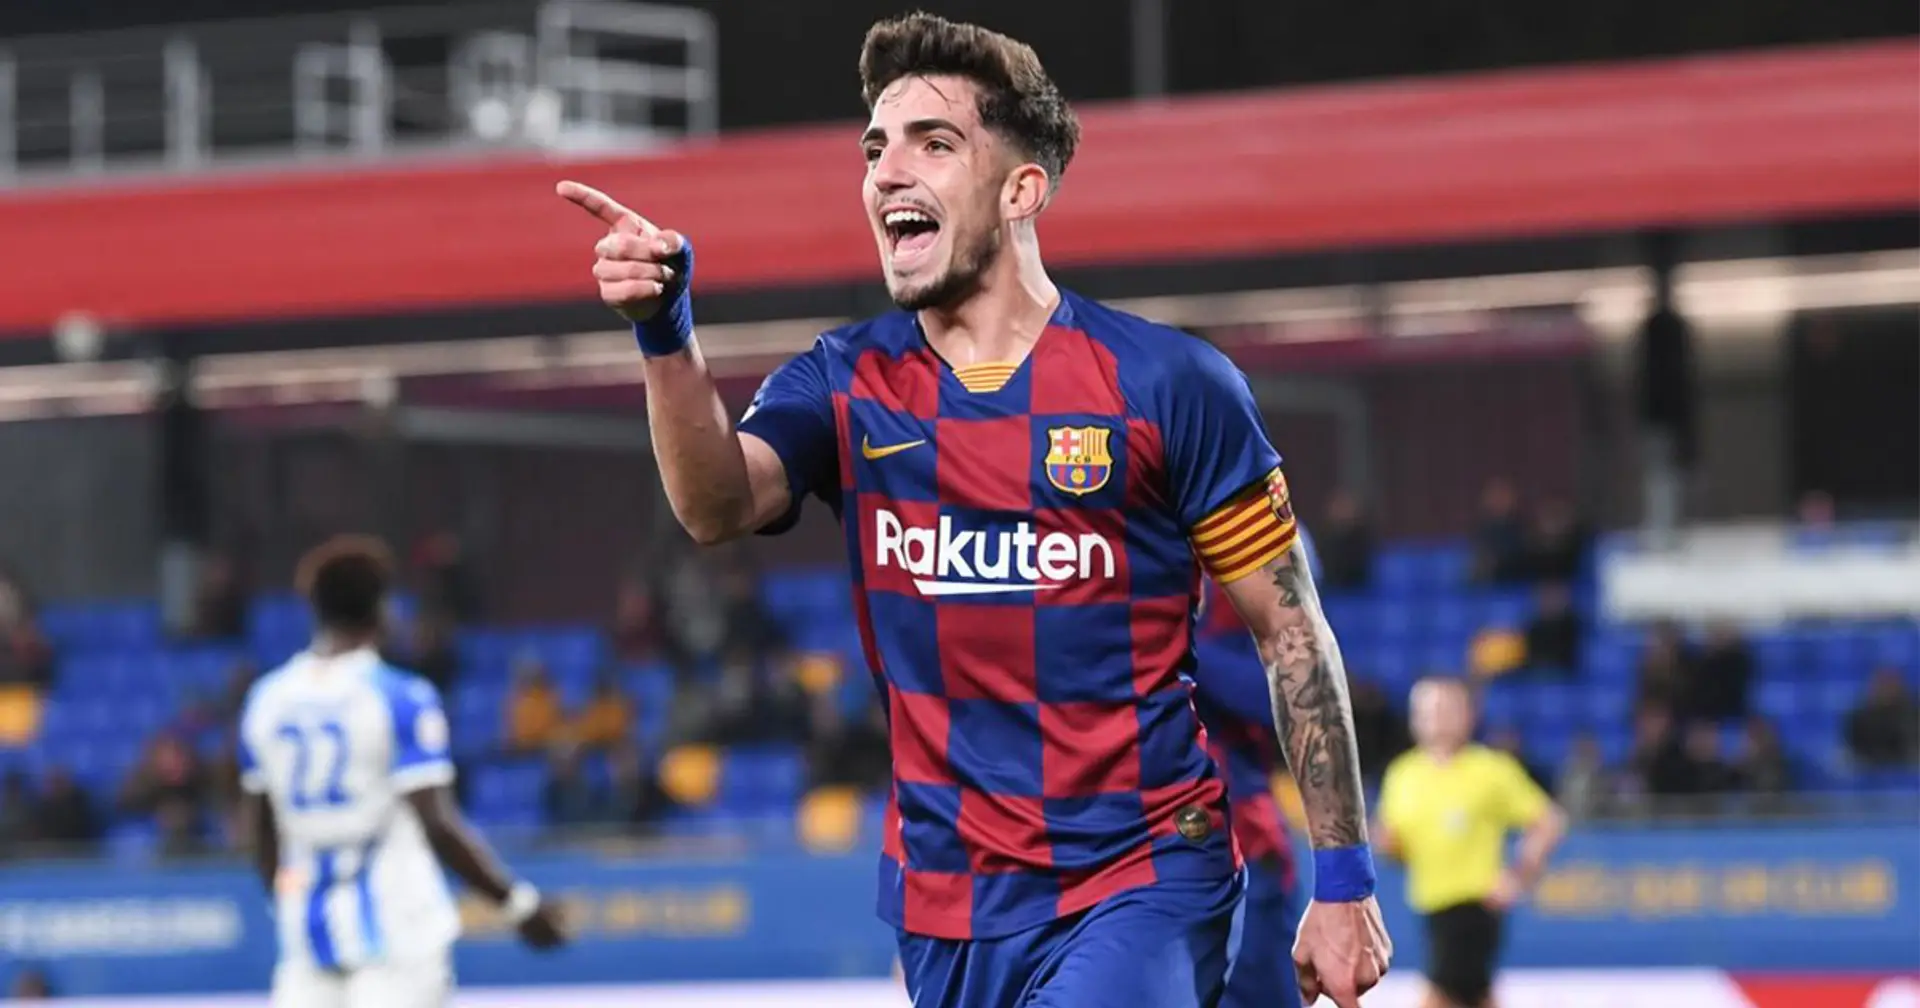 Barca B goalscorer in epic Sabadell clash Monchu 'likely to leave' amid interest from Premier League sides